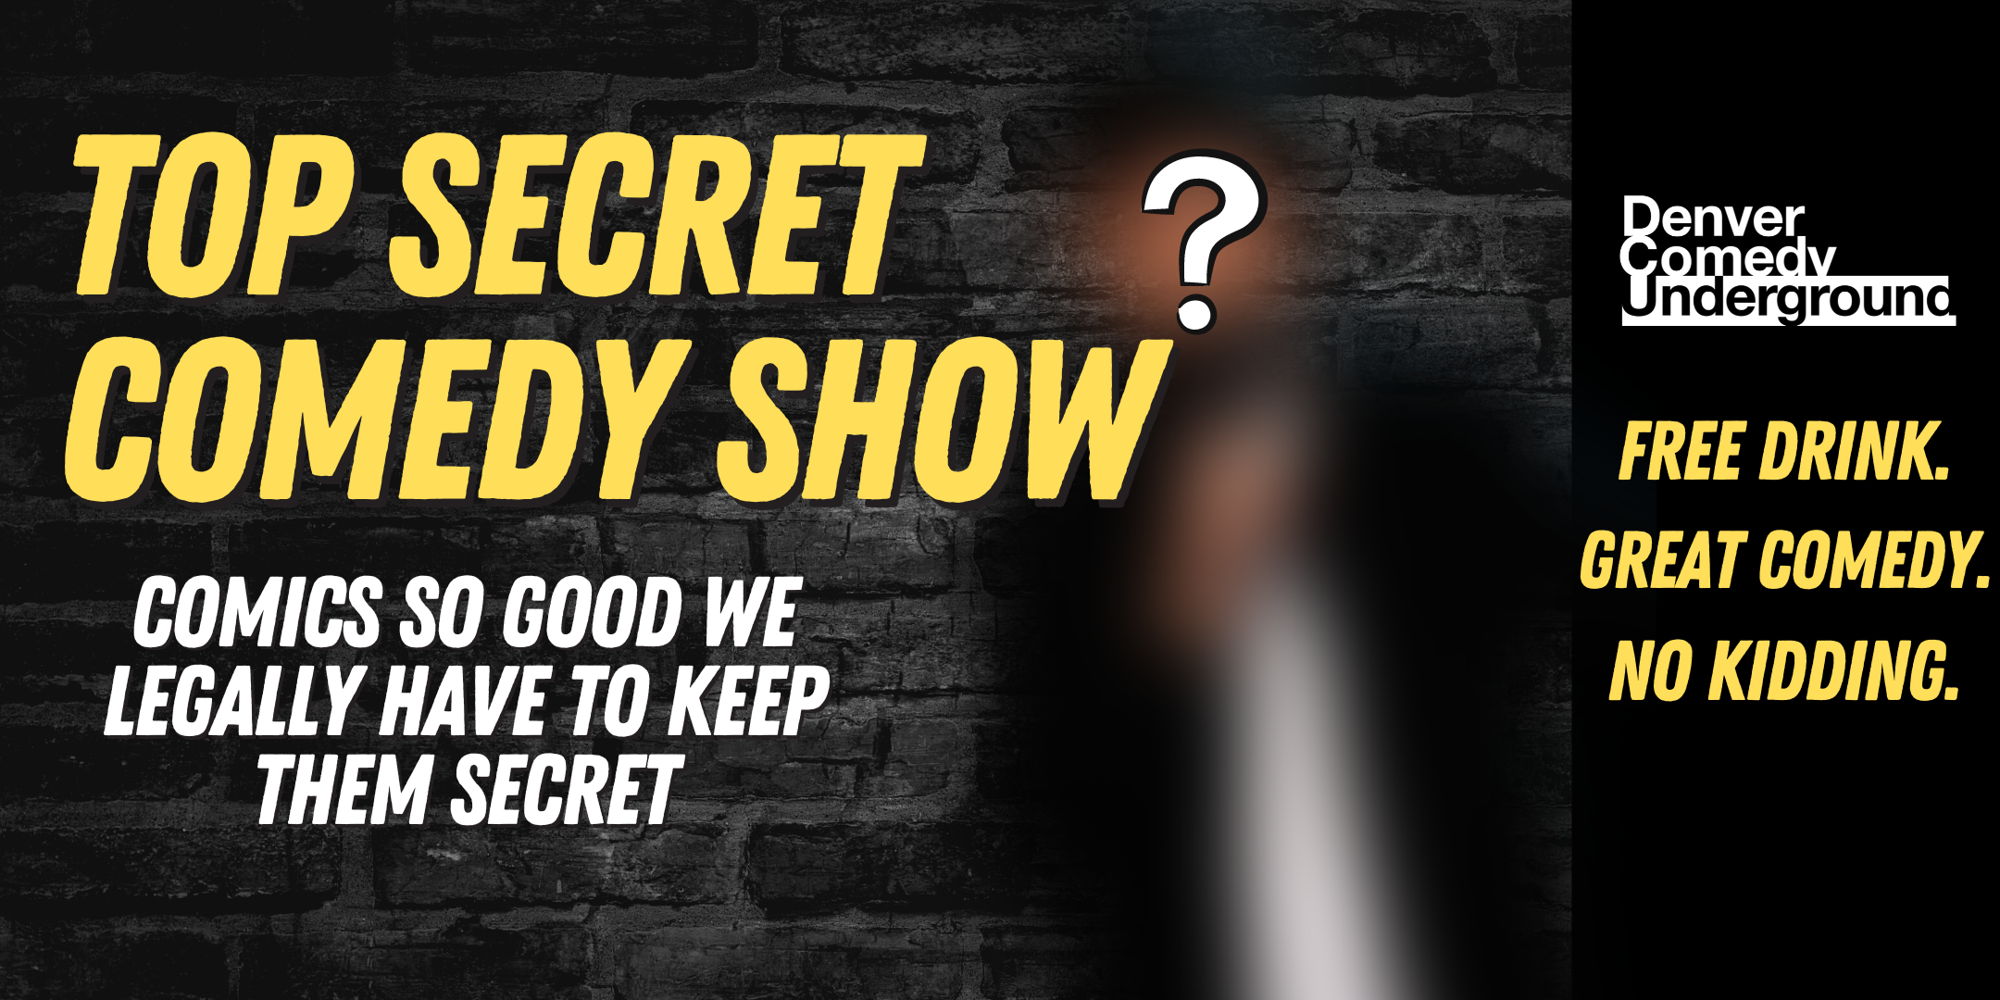 Top Secret Comedy Show at Denver Comedy Underground! With Free Drink and Free Pizza! promotional image